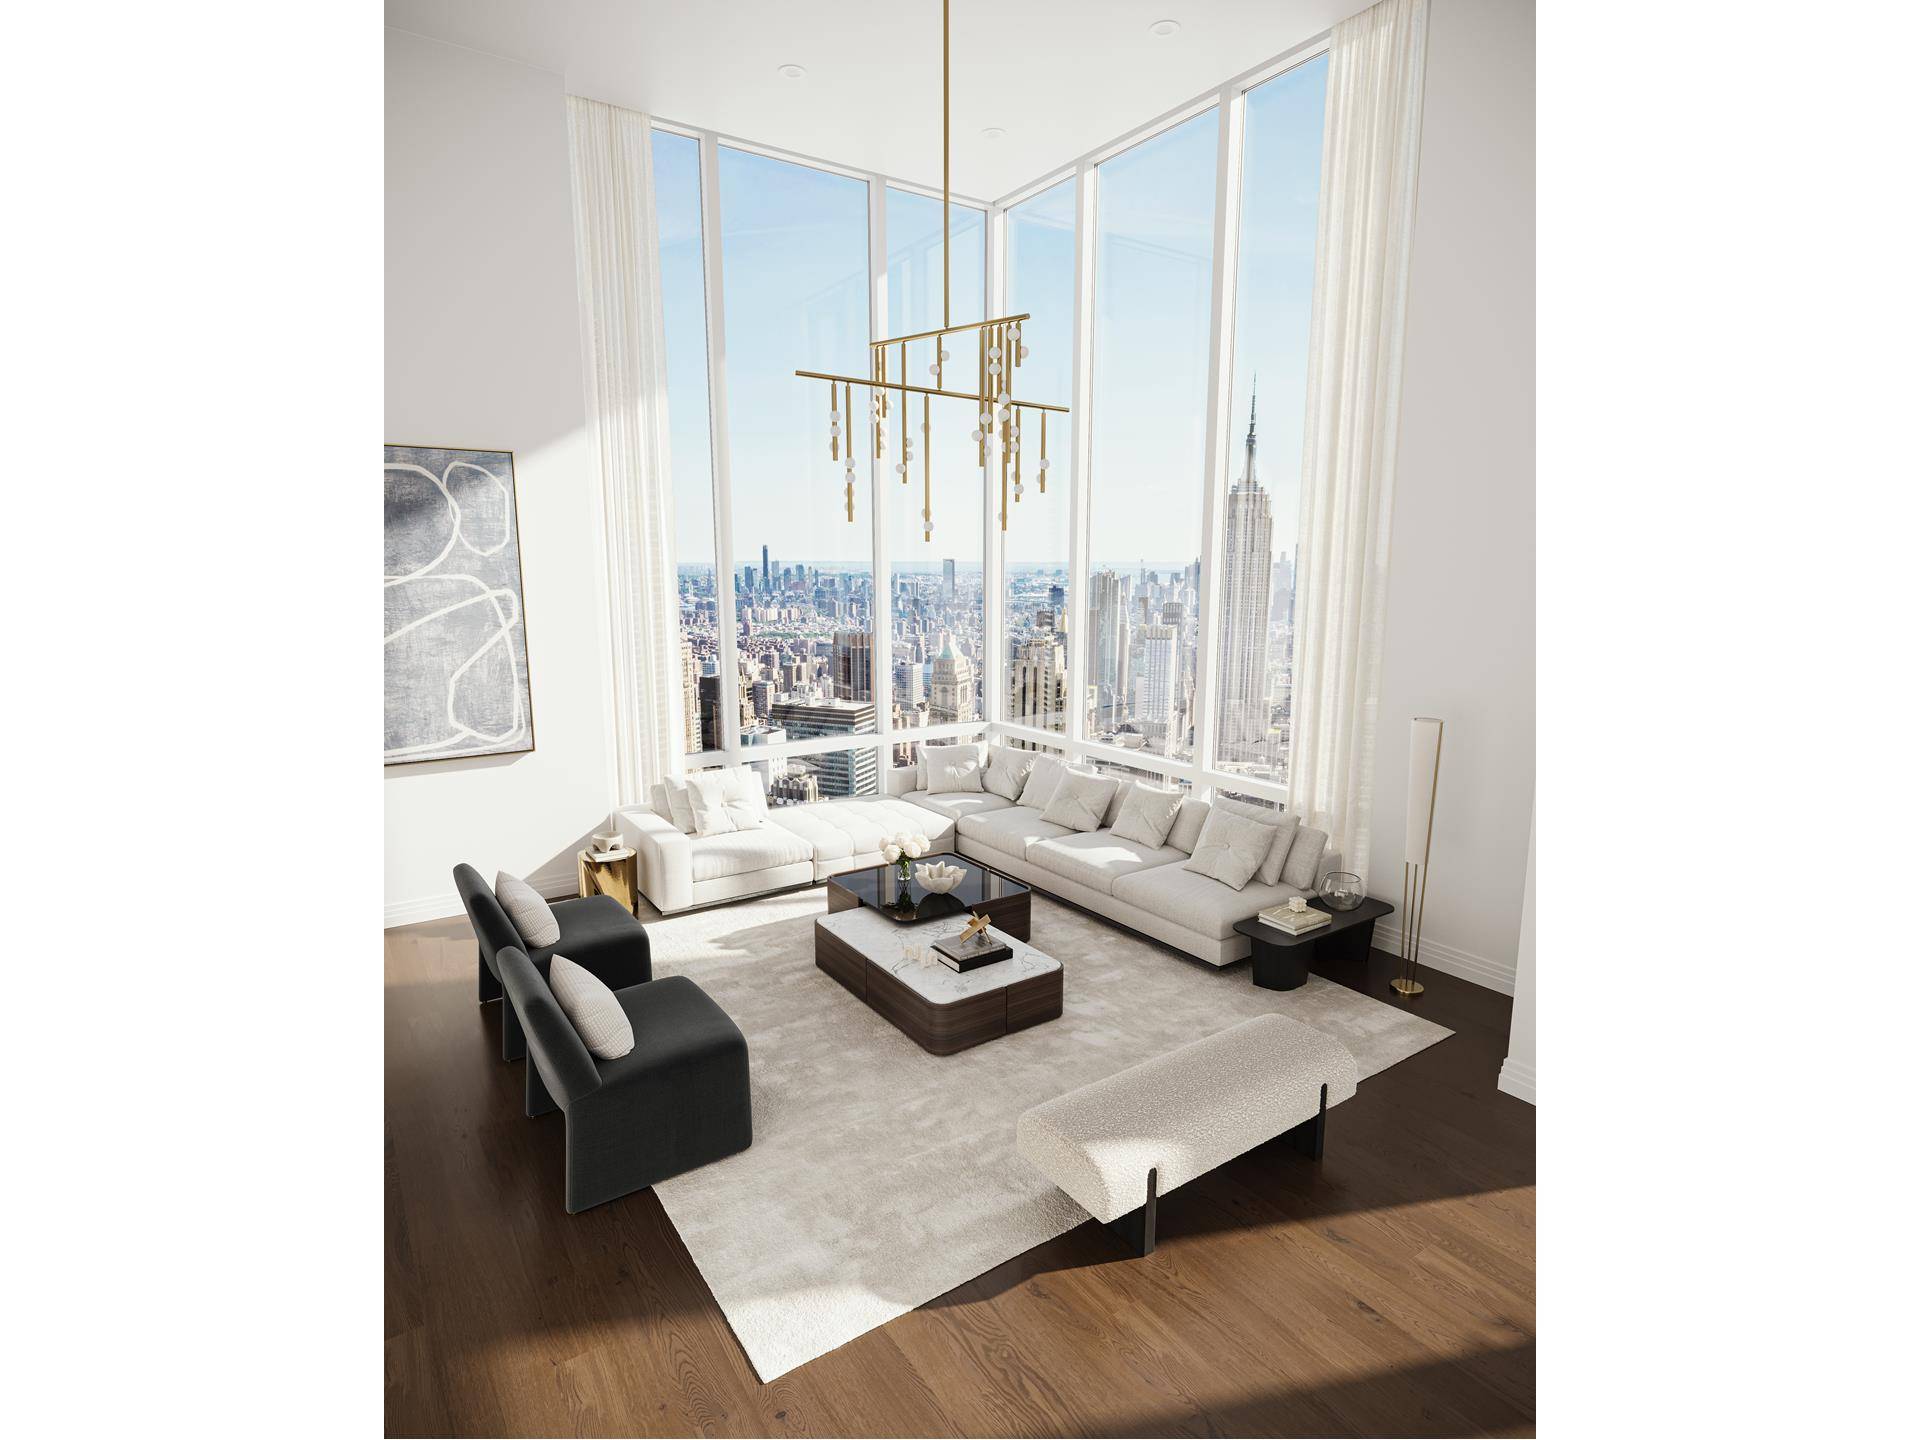 An extraordinary opportunity to craft your dream home within one of Manhattan's most striking penthouses a blank canvas awaiting your personal touch.